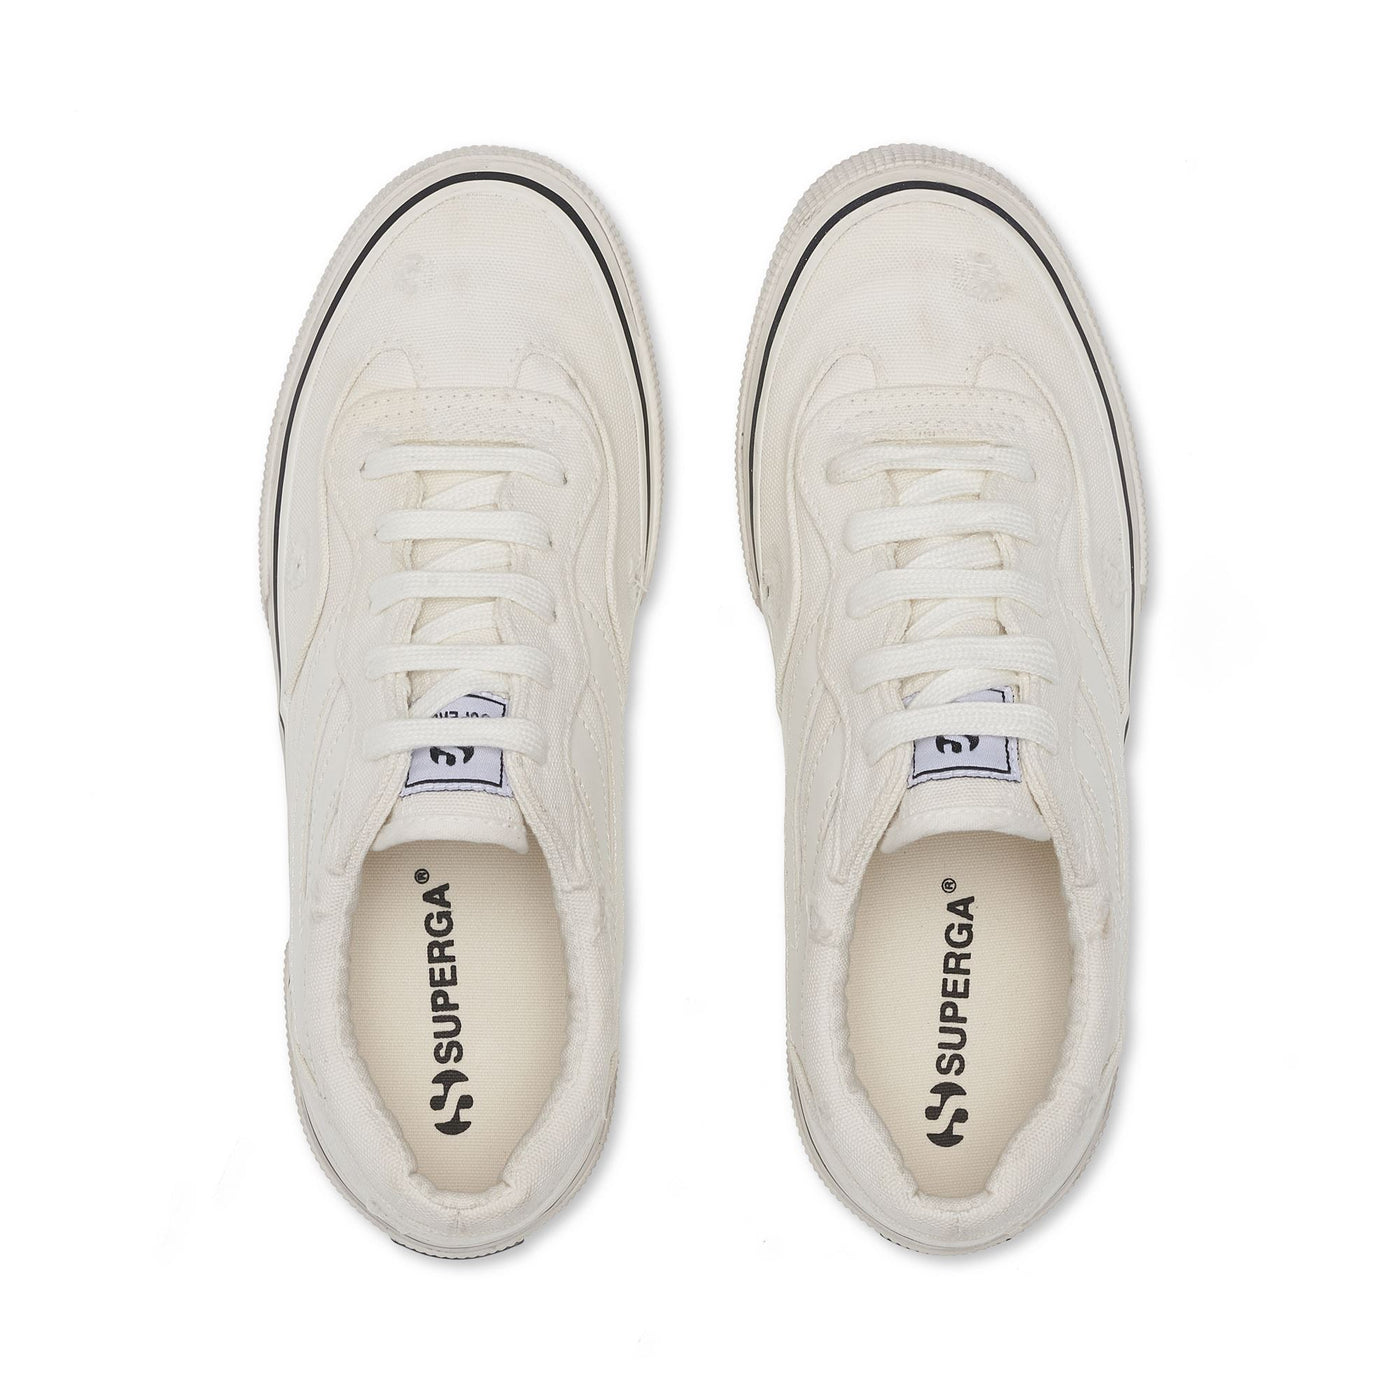 Sneakers Unisex 2941 REVOLLEY STONE WASHED Low Cut WHITE AVORIO-F AVORIO Dressed Back (jpg Rgb)		